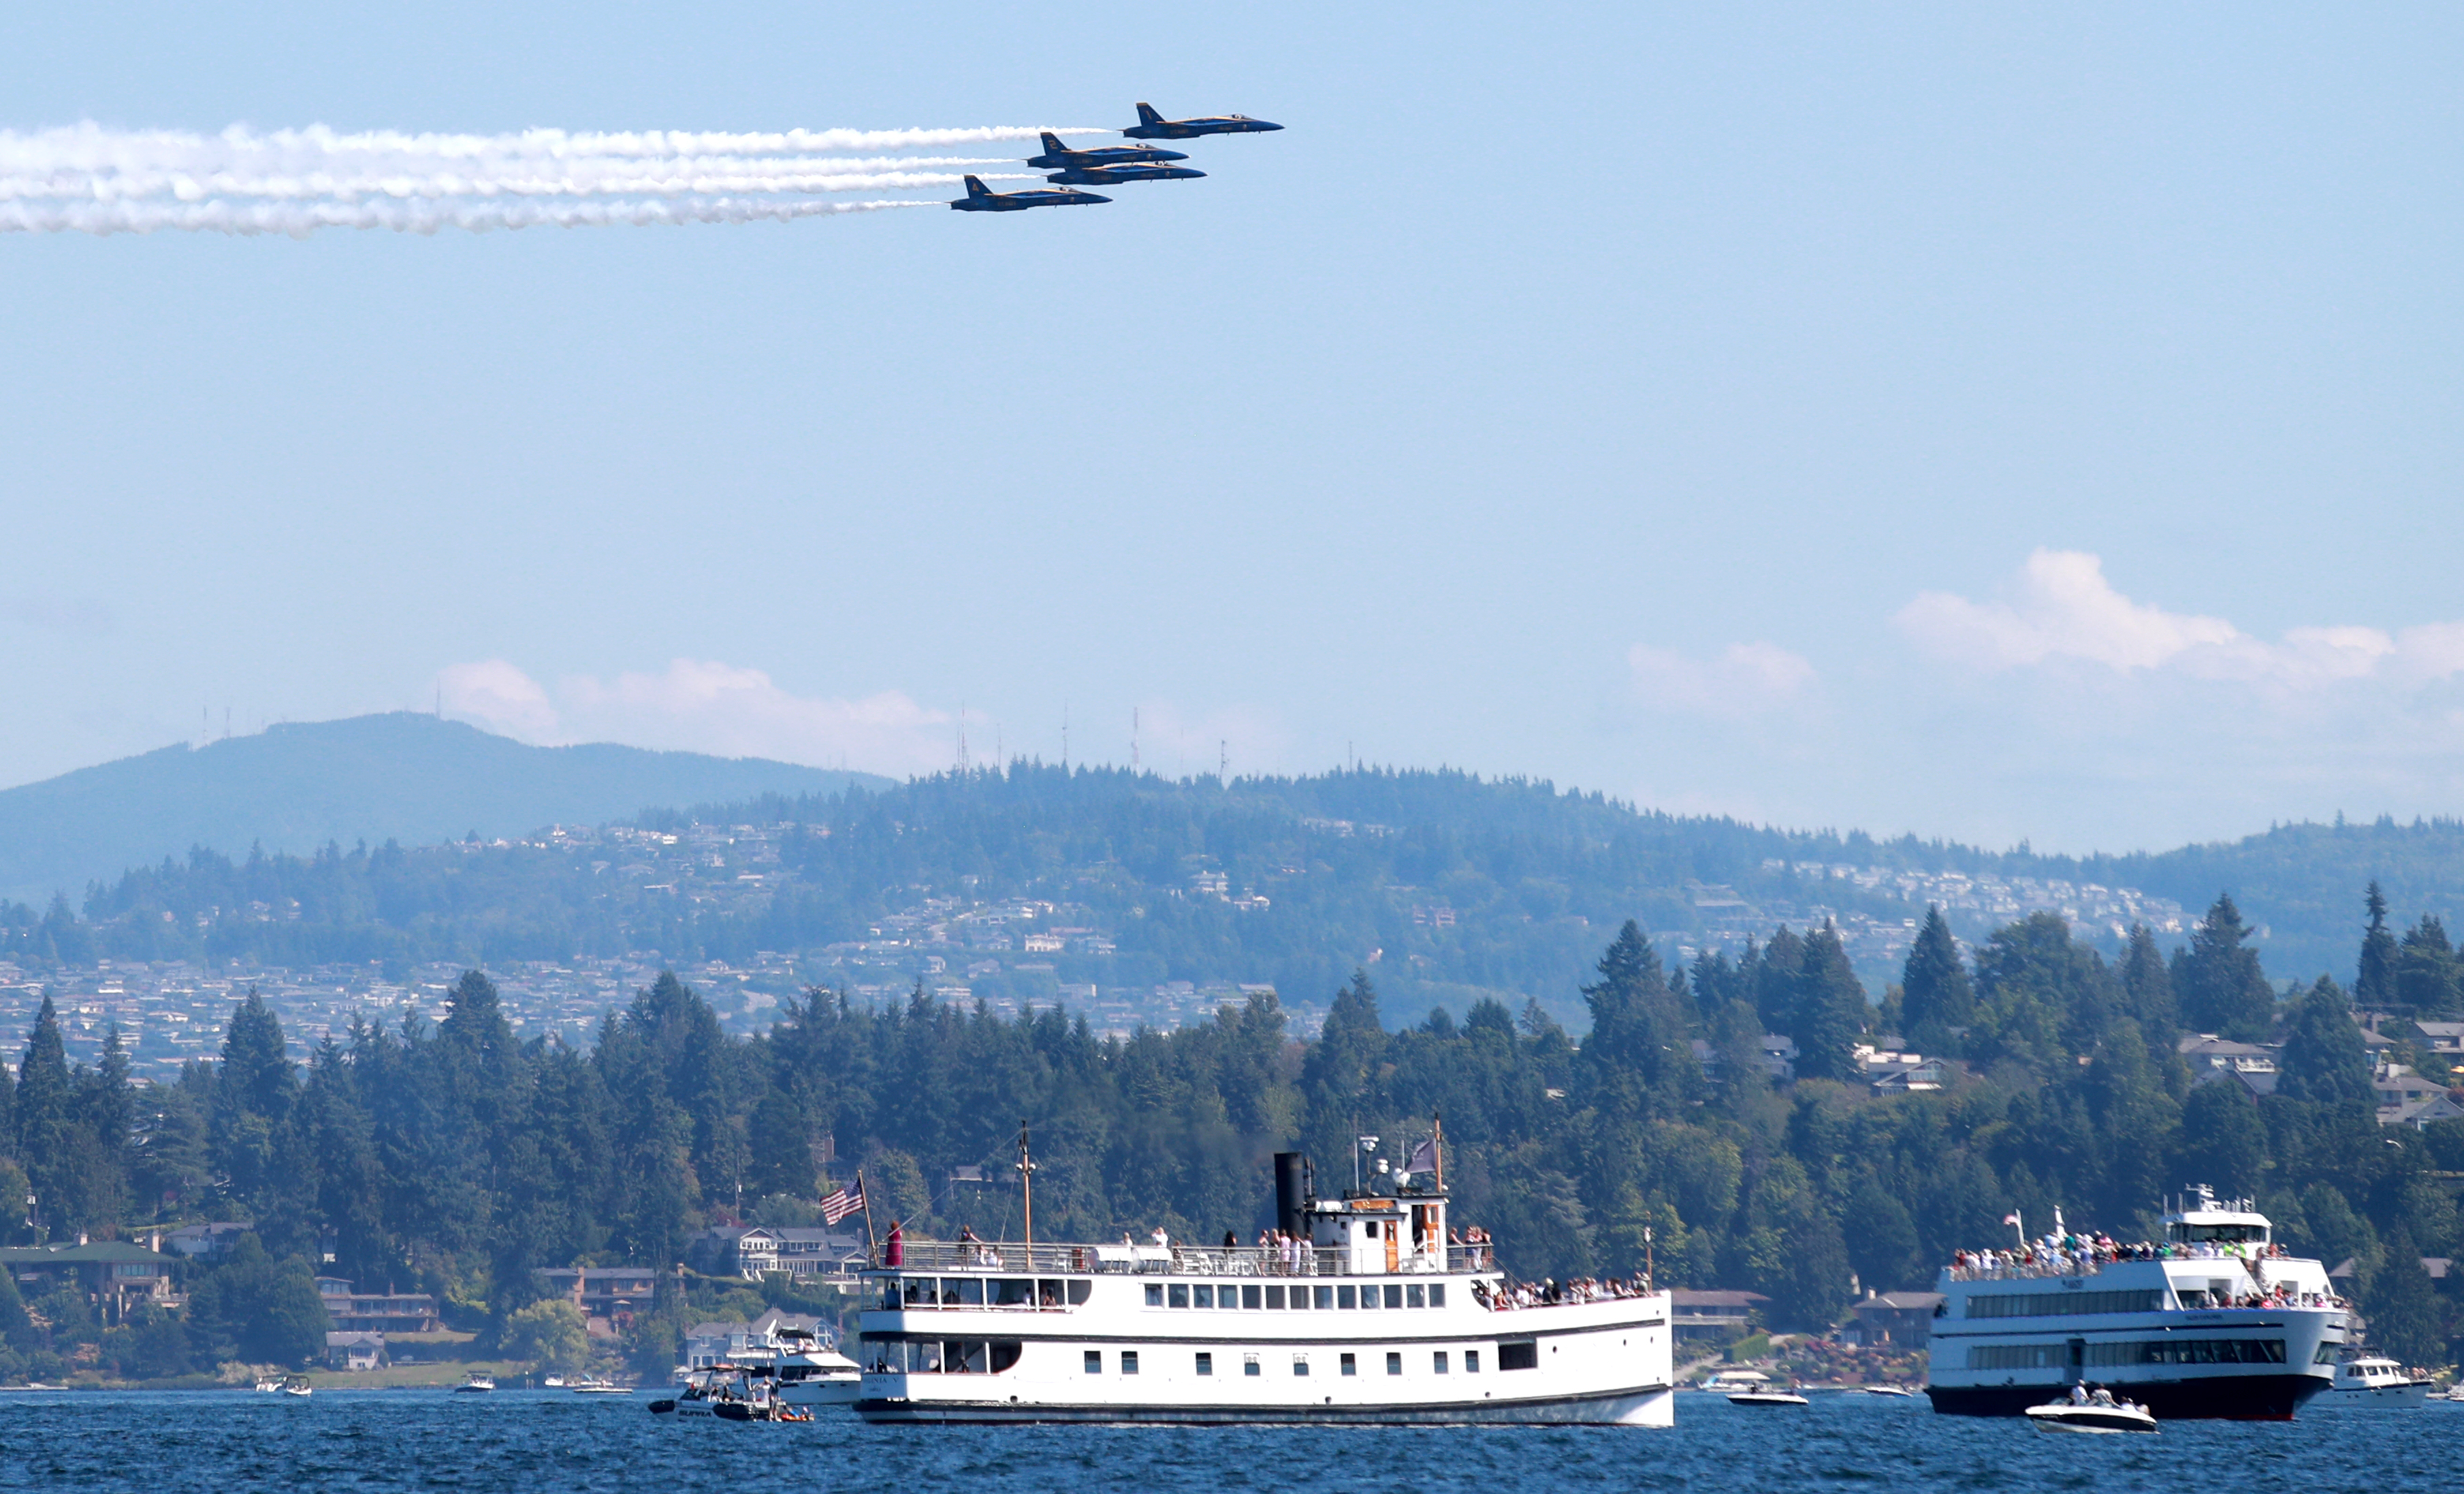 Two ferries sailing on a sunny day with three Blue Angel jets flying above